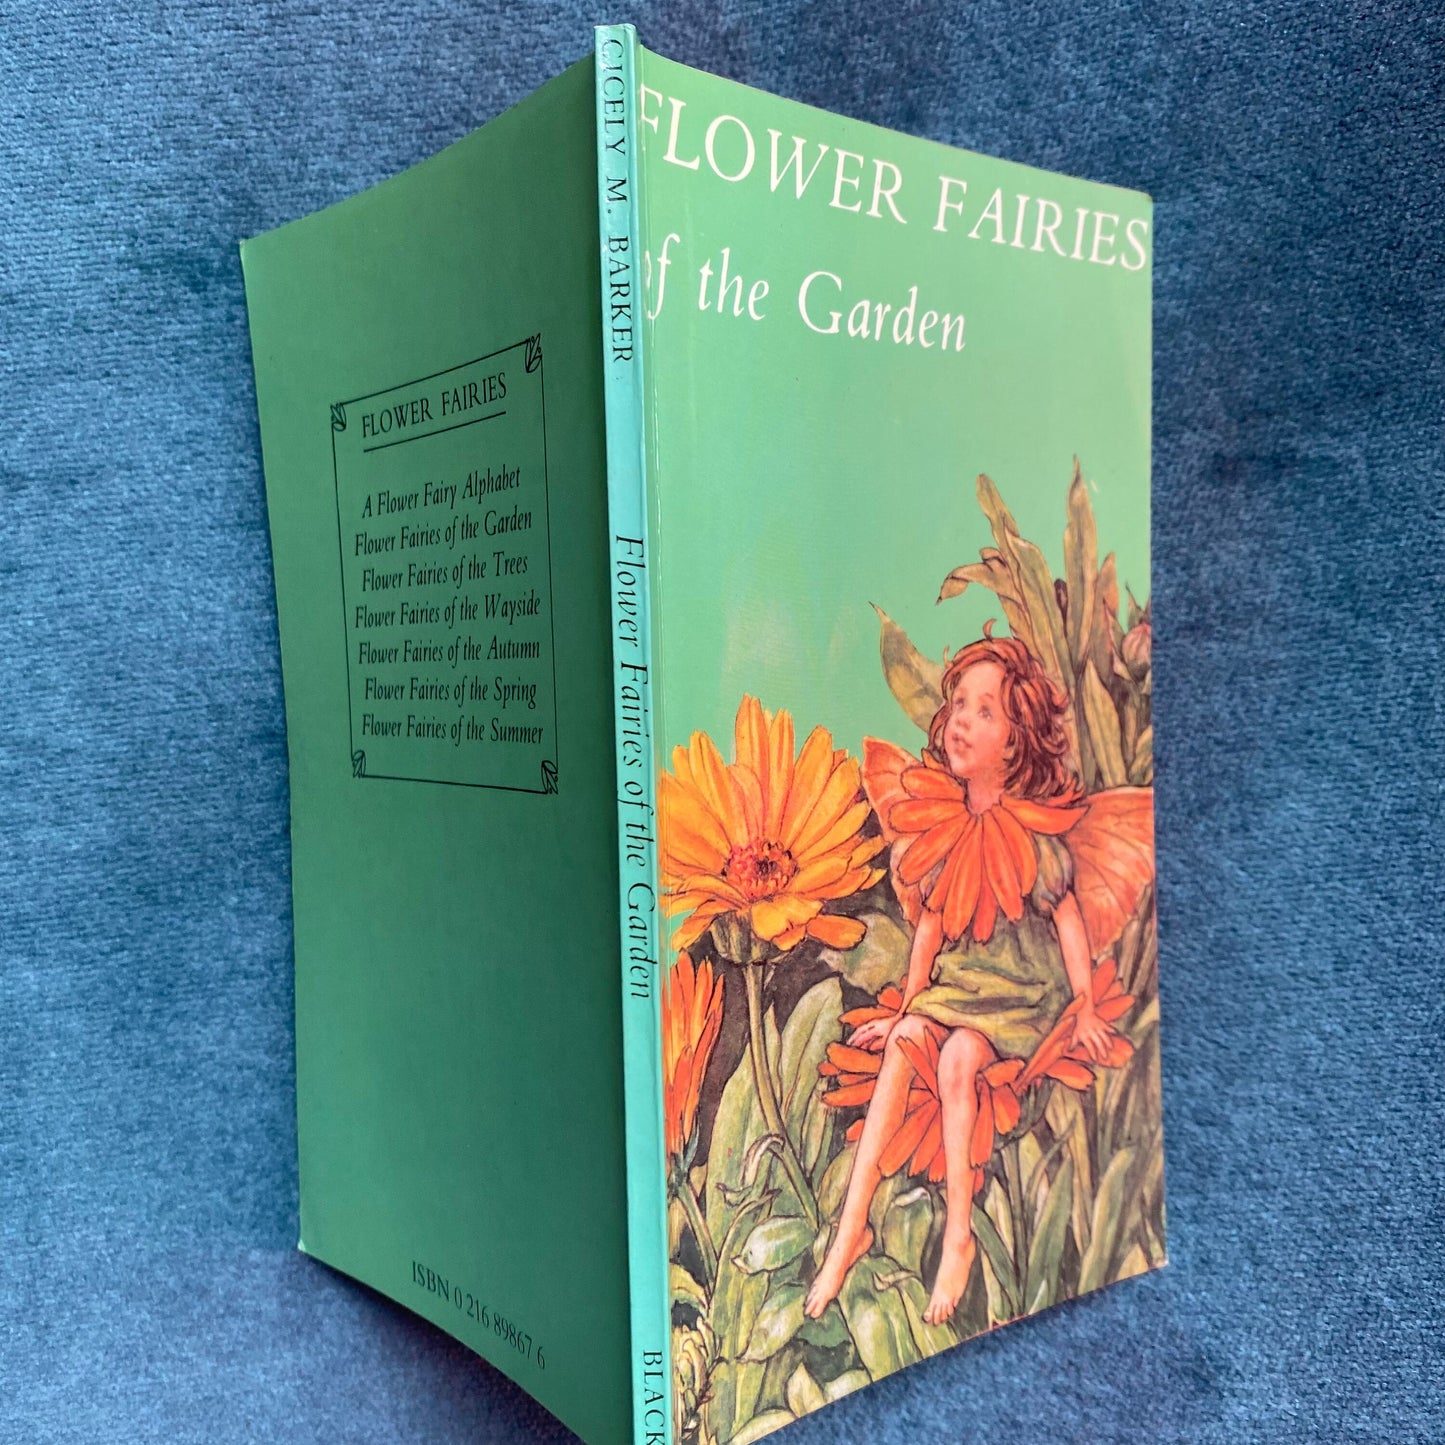 Flower Fairies of the Garden , 1970s edition  by Cicely M Barker. Great gift idea